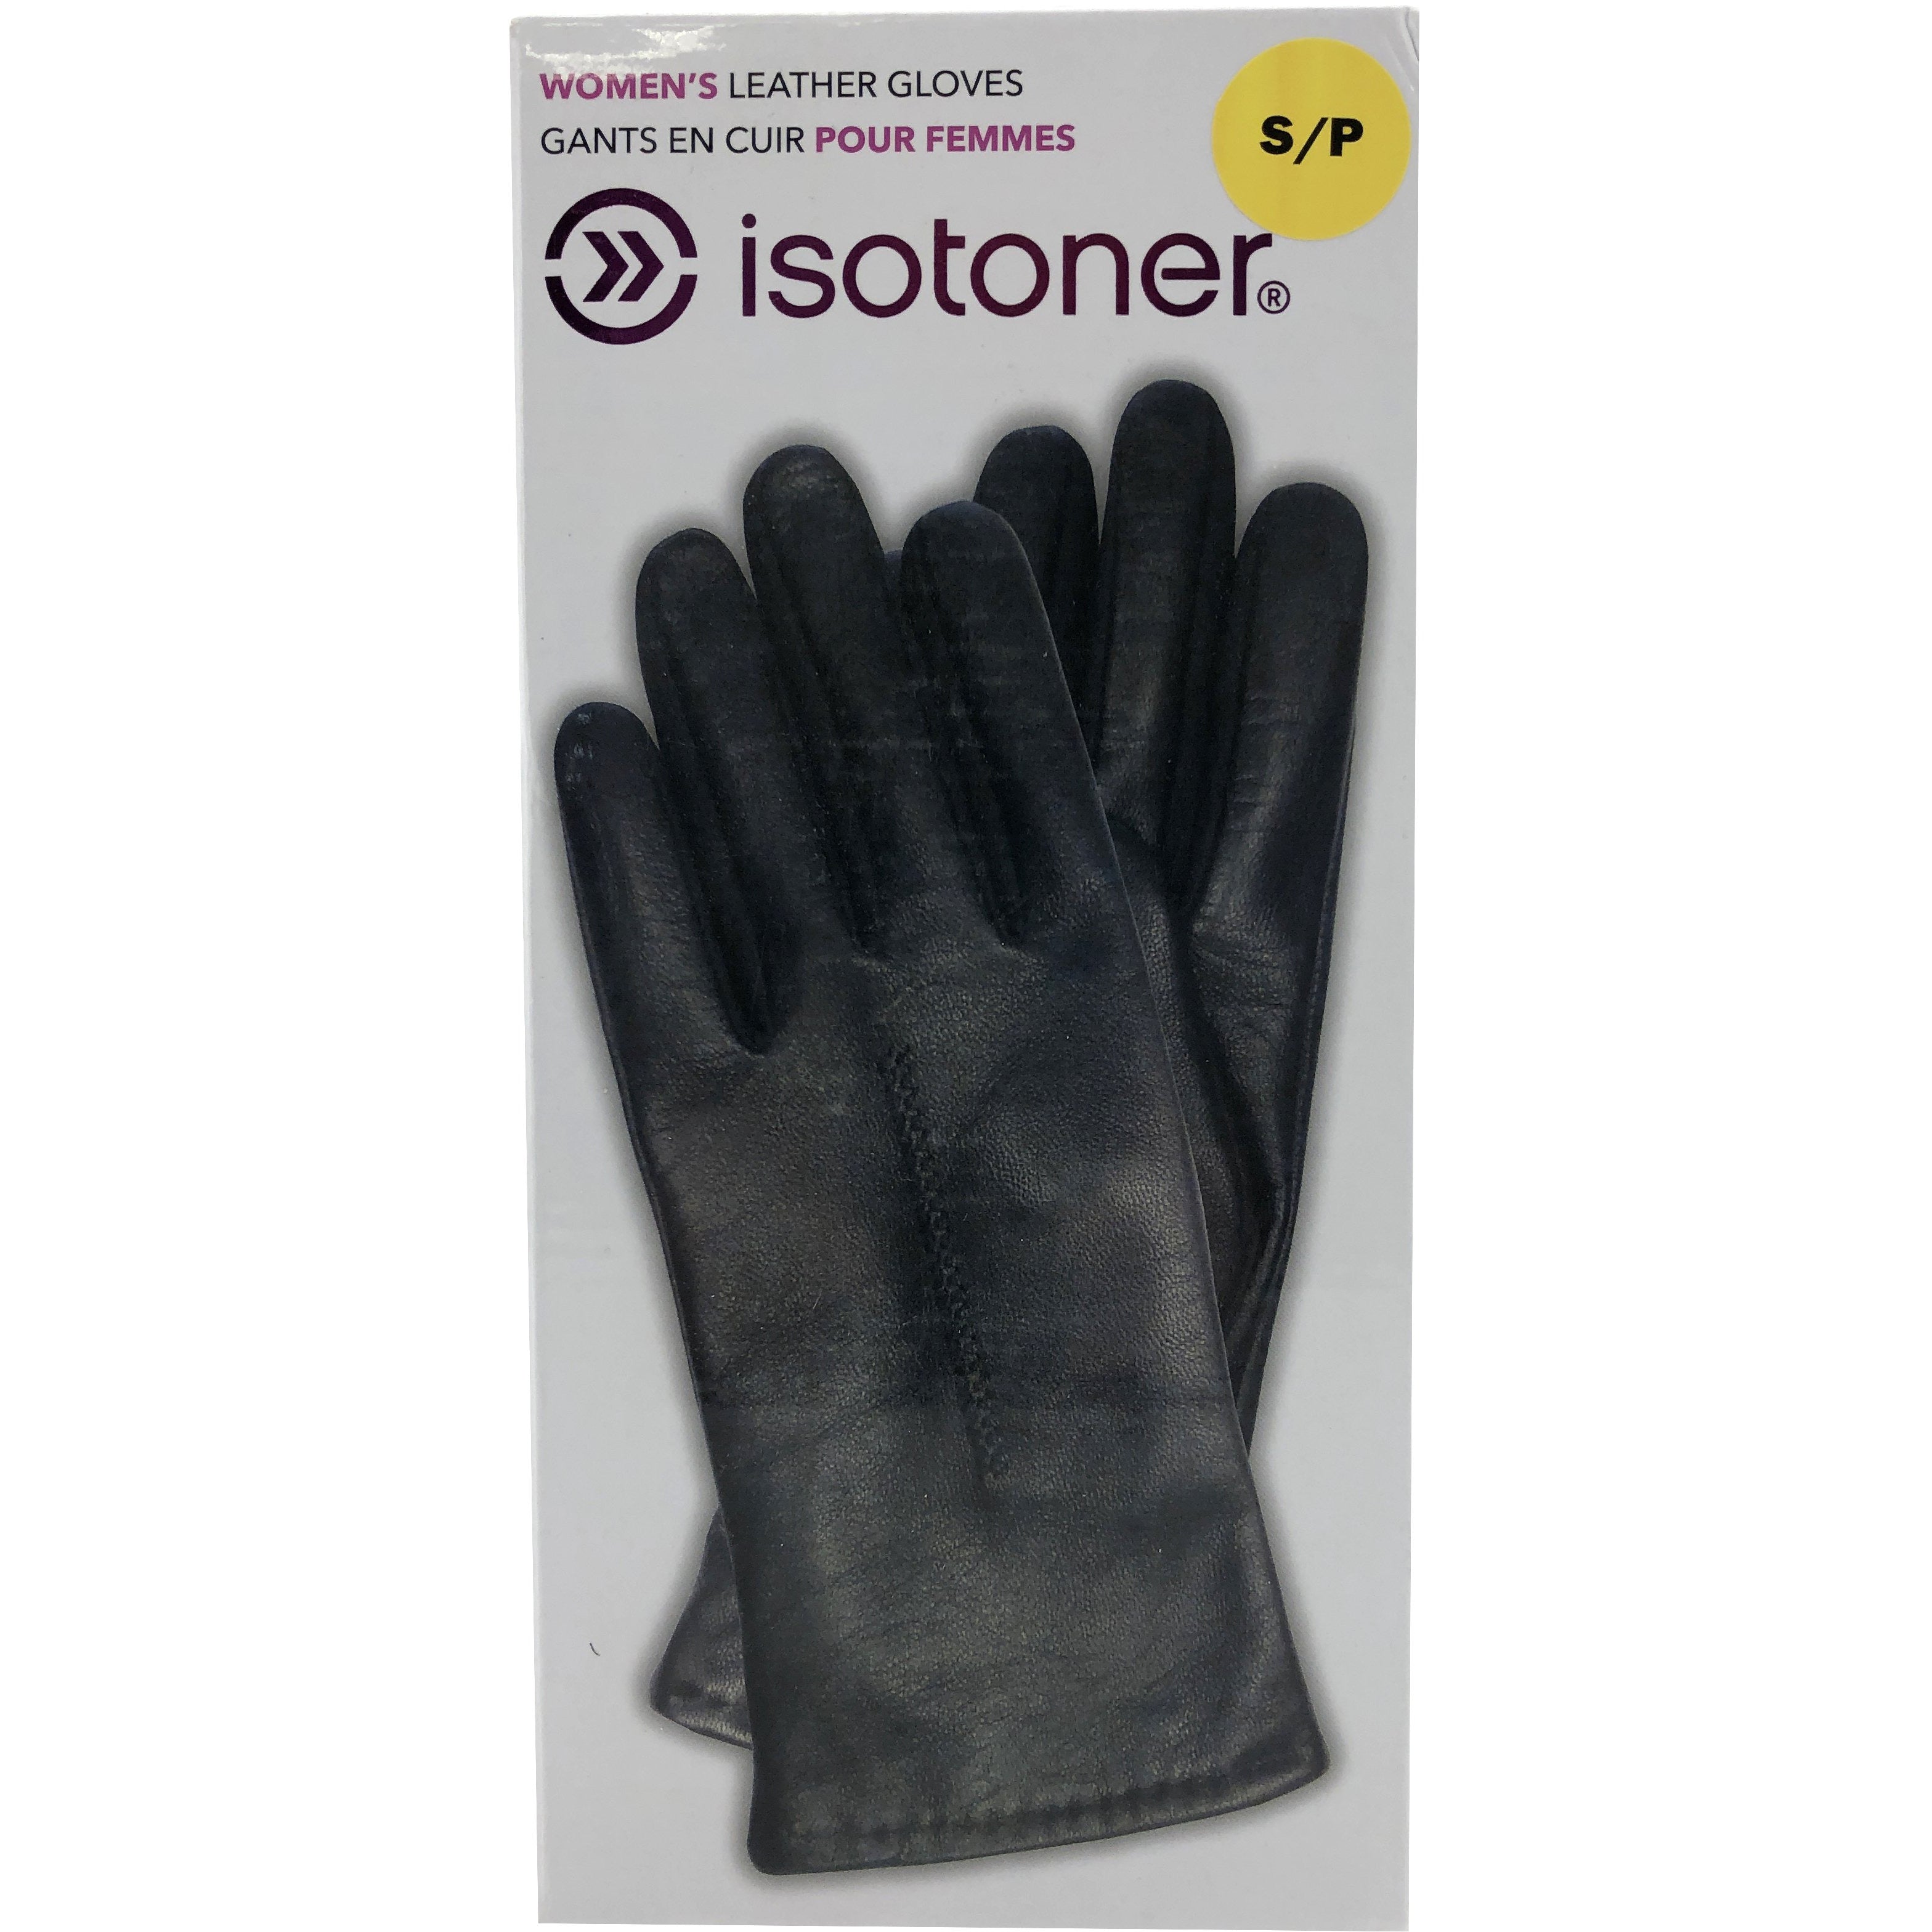 Womens's Leather Gloves / Isotoners / Various Sizes